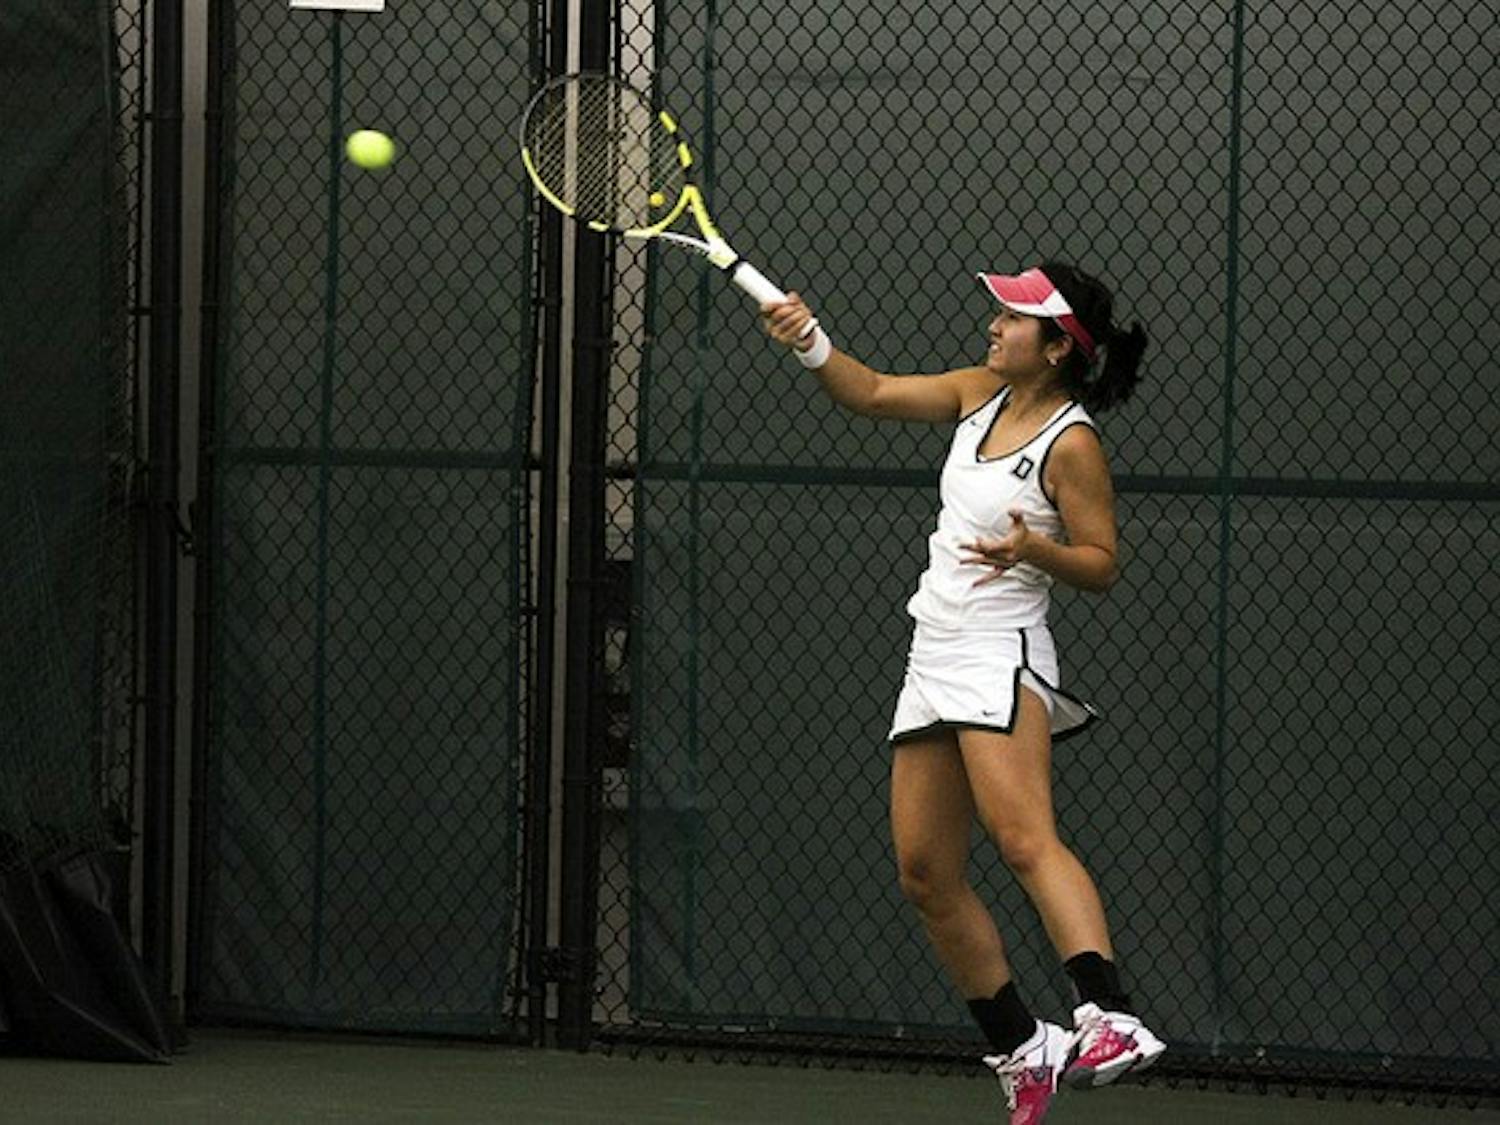 The Dartmouth women's tennis team won all nine matches against Boston University on Saturday en route to a 7-0 victory over the Terriers in Hanover.